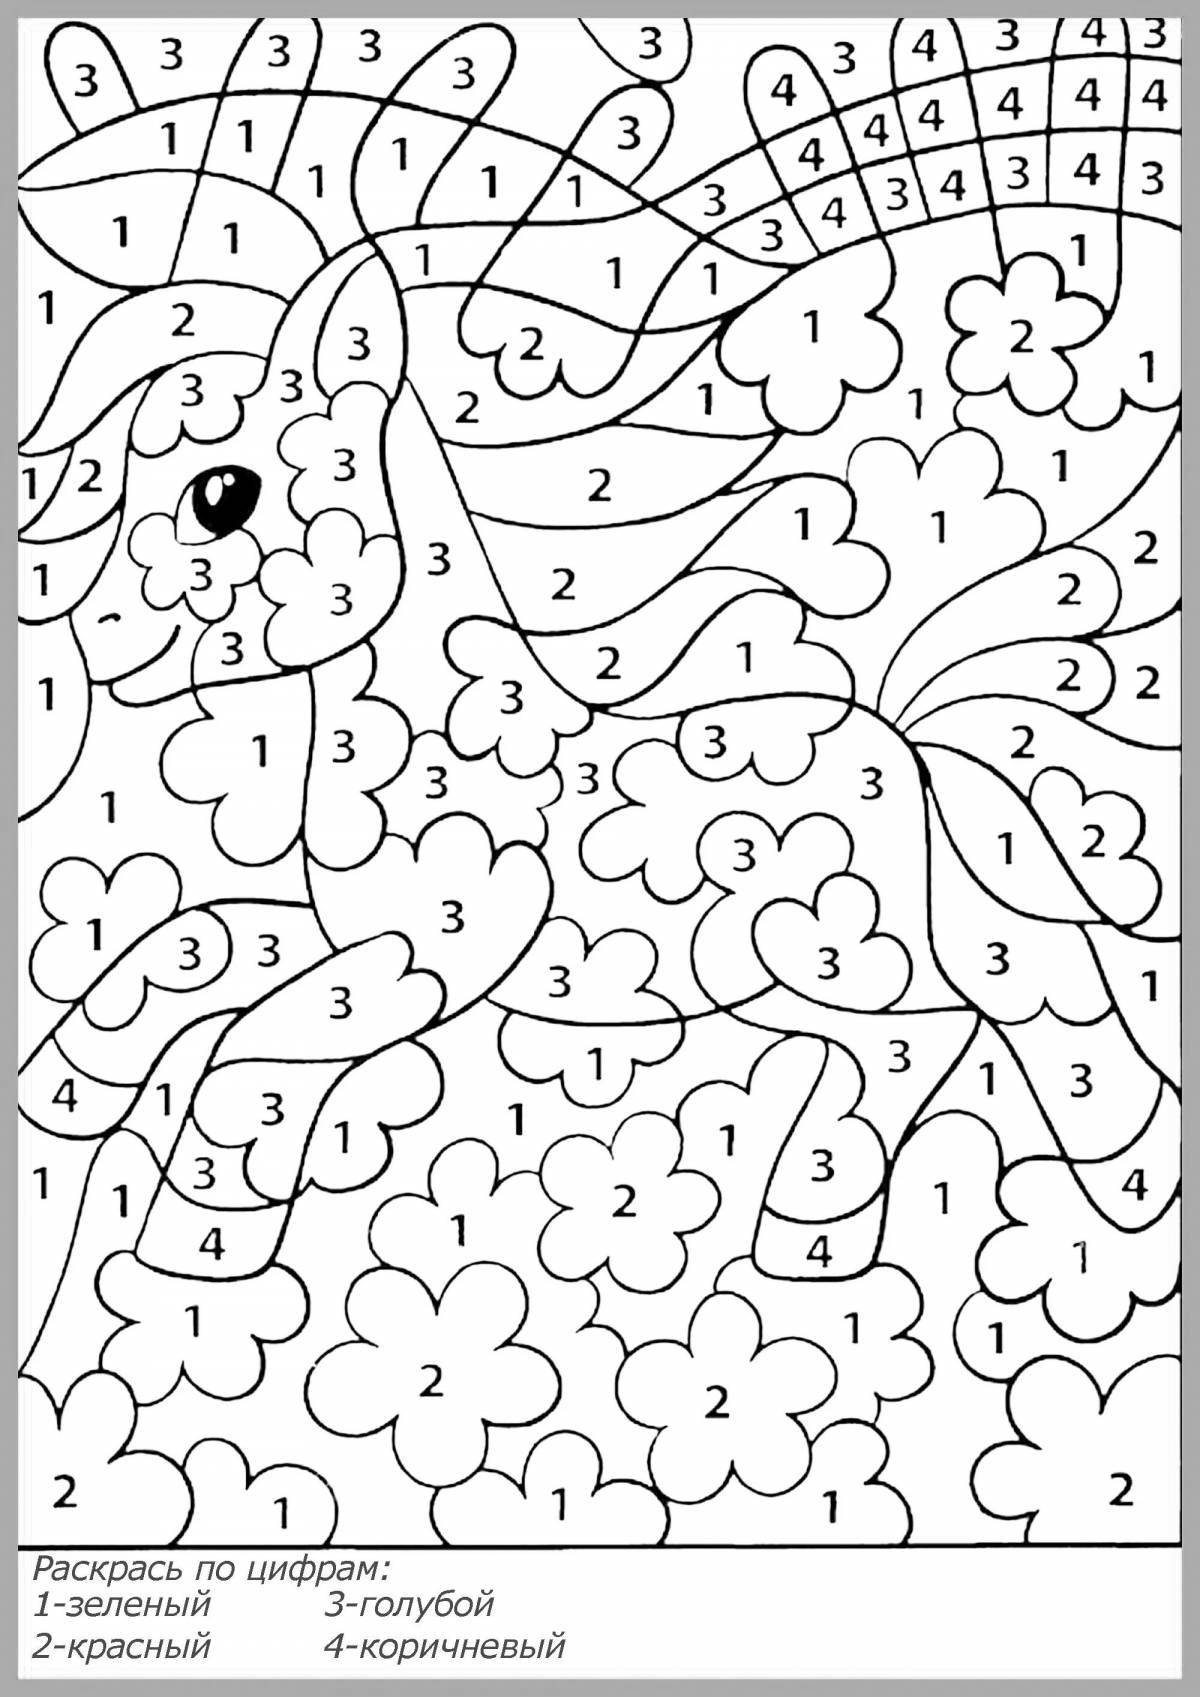 Educational coloring by numbers for children 5-7 years old